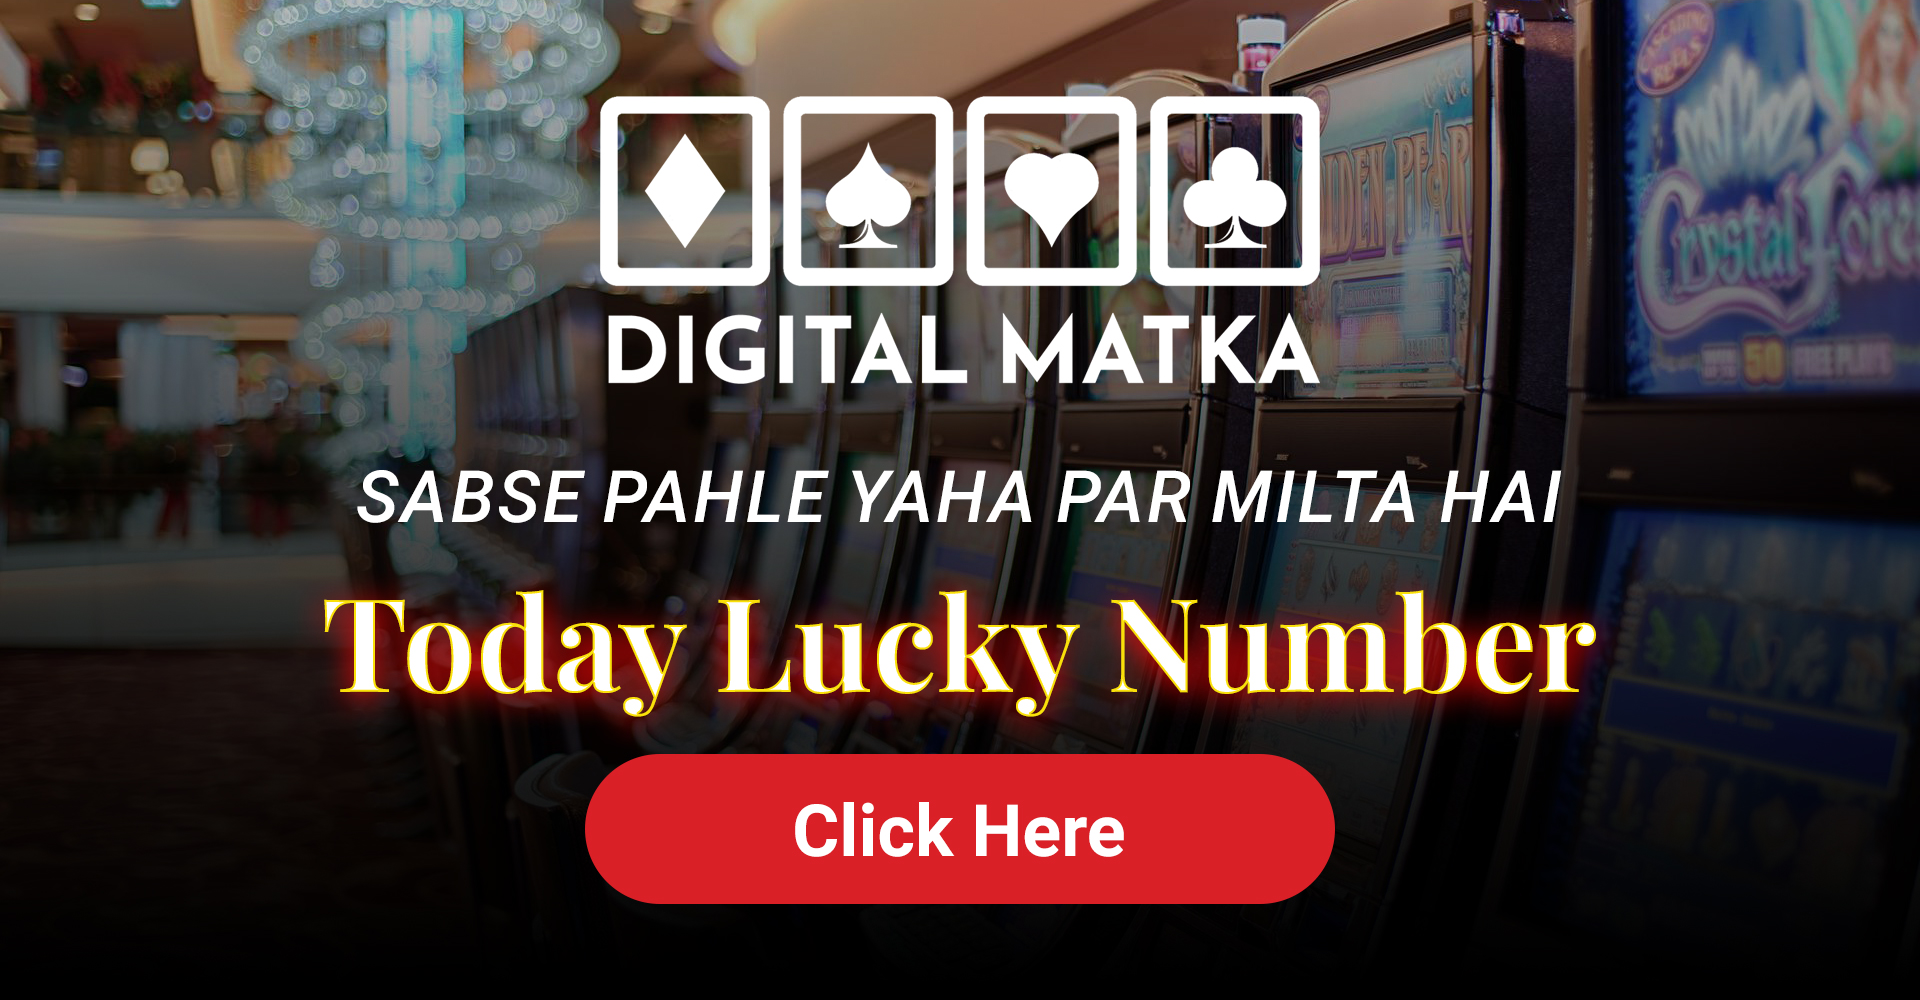 Welcome to Digital Matka Site